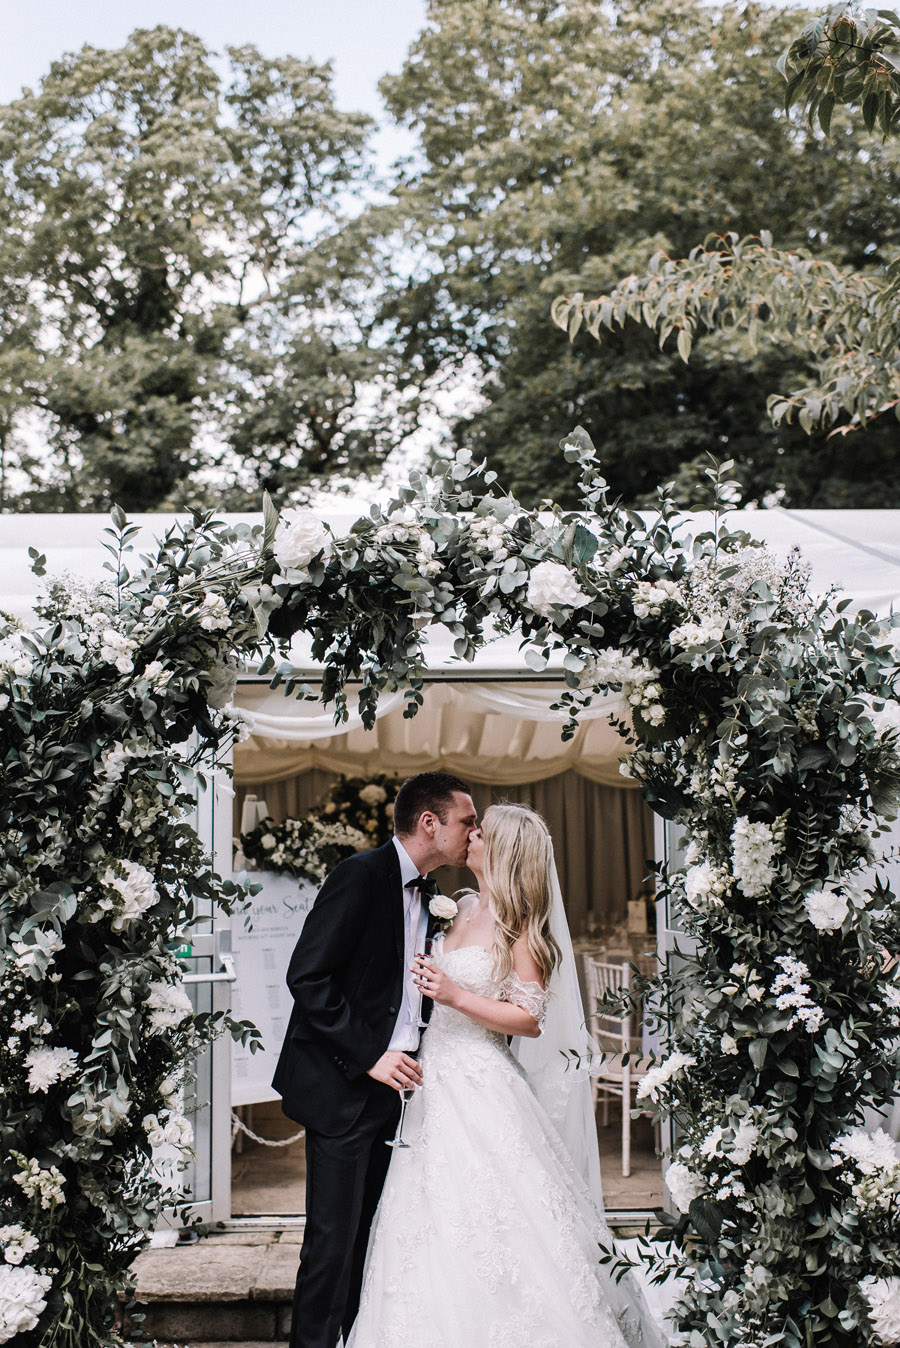 Whimsical wedding at Birtsmorton Court with beautiful photography by Oobaloos (14)